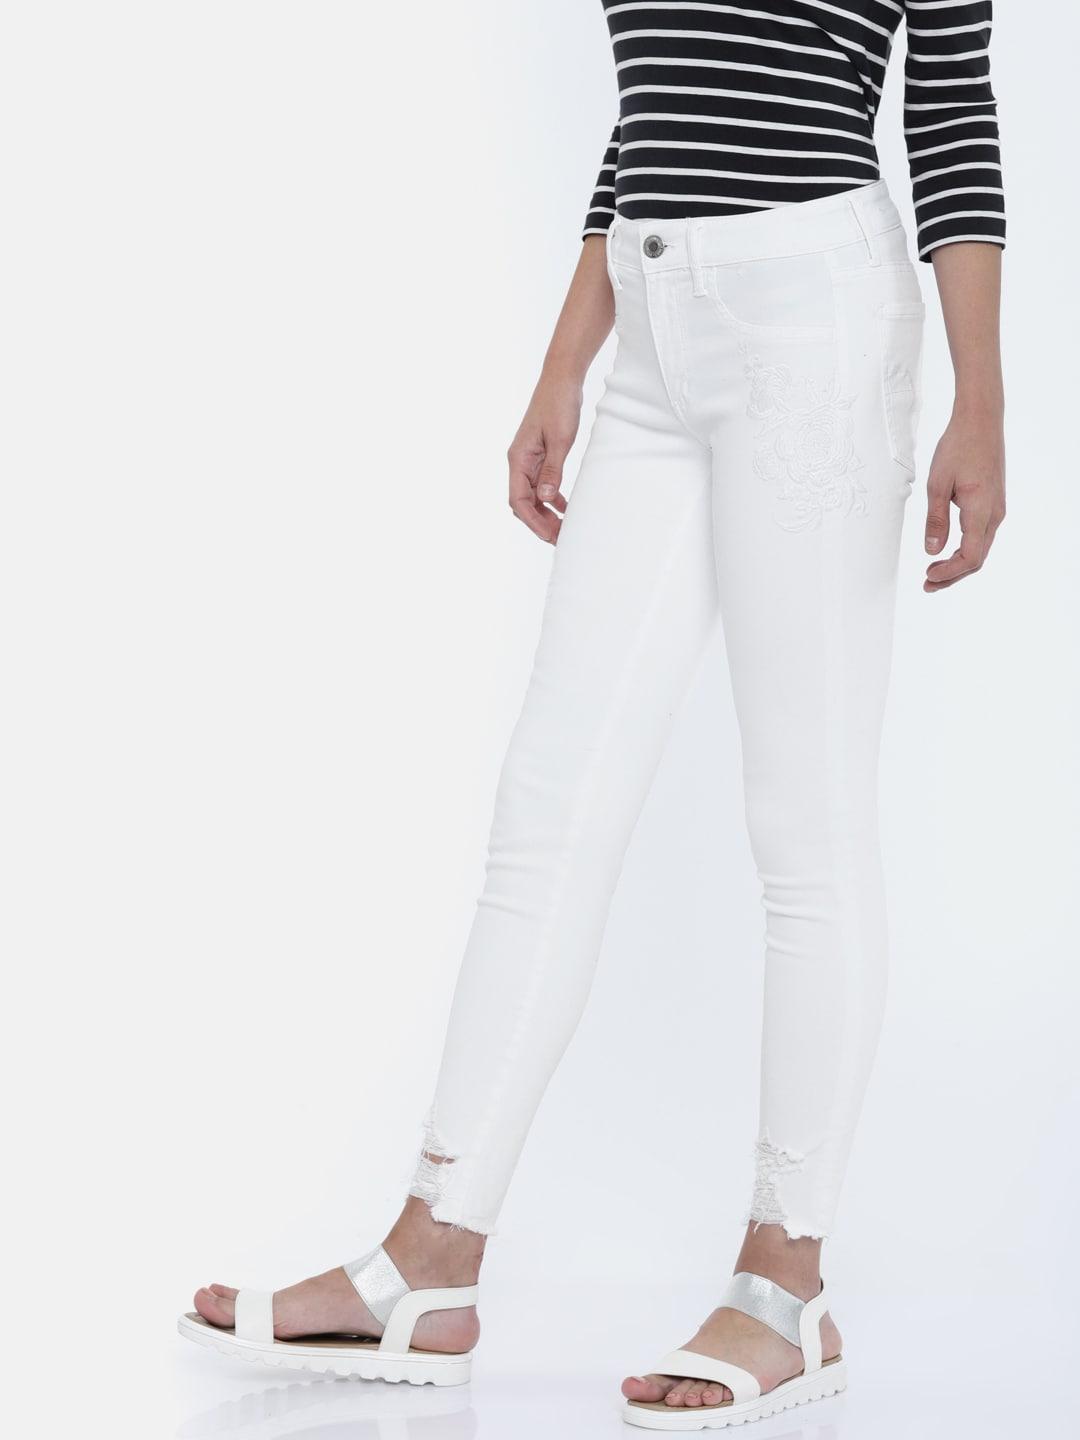 american-eagle-outfitters-women-white-solid-jeggings